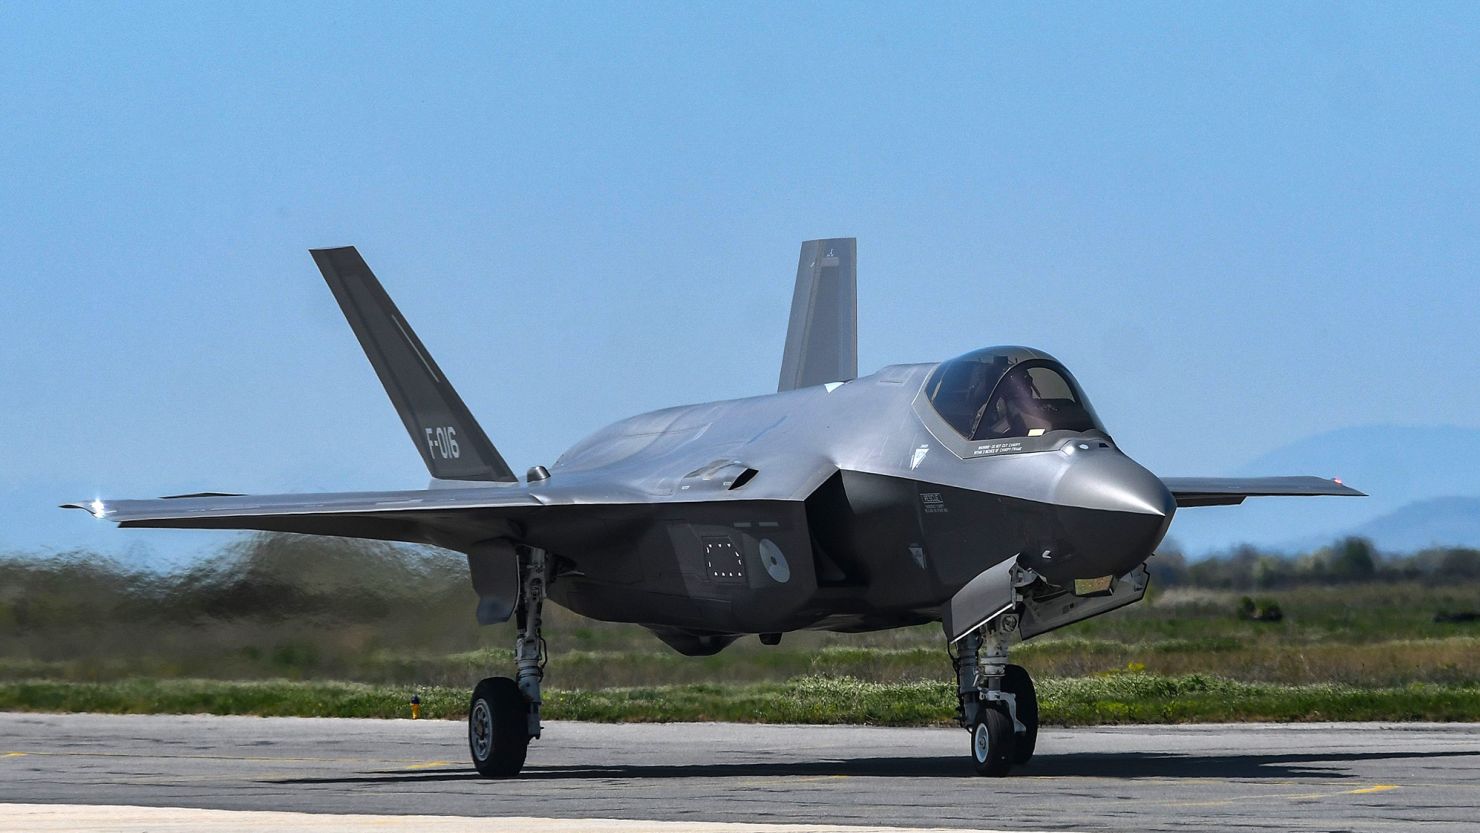 Mandatory Credit: Photo by Georgi Paleykov/NurPhoto/Shutterstock (12895759q)
Lockheed Martin F-35 Lightning II jet before take off at Graf Ignatievo Air Force Base near Plovdiv, Bulgaria on 14 April, 2022.
Four Lockheed Martin F-35 Lightning II jets were relocated by  Netherlands Air Force to the Republic of Bulgaria for the forthcoming implementation of a mission for enhanced joint protection of Bulgarian airspace.
F-35 Aircrafts Were Relocated By The Kingdom Of The Netherlands To The Republic Of Bulgaria, Plovdin - 14 Apr 2022